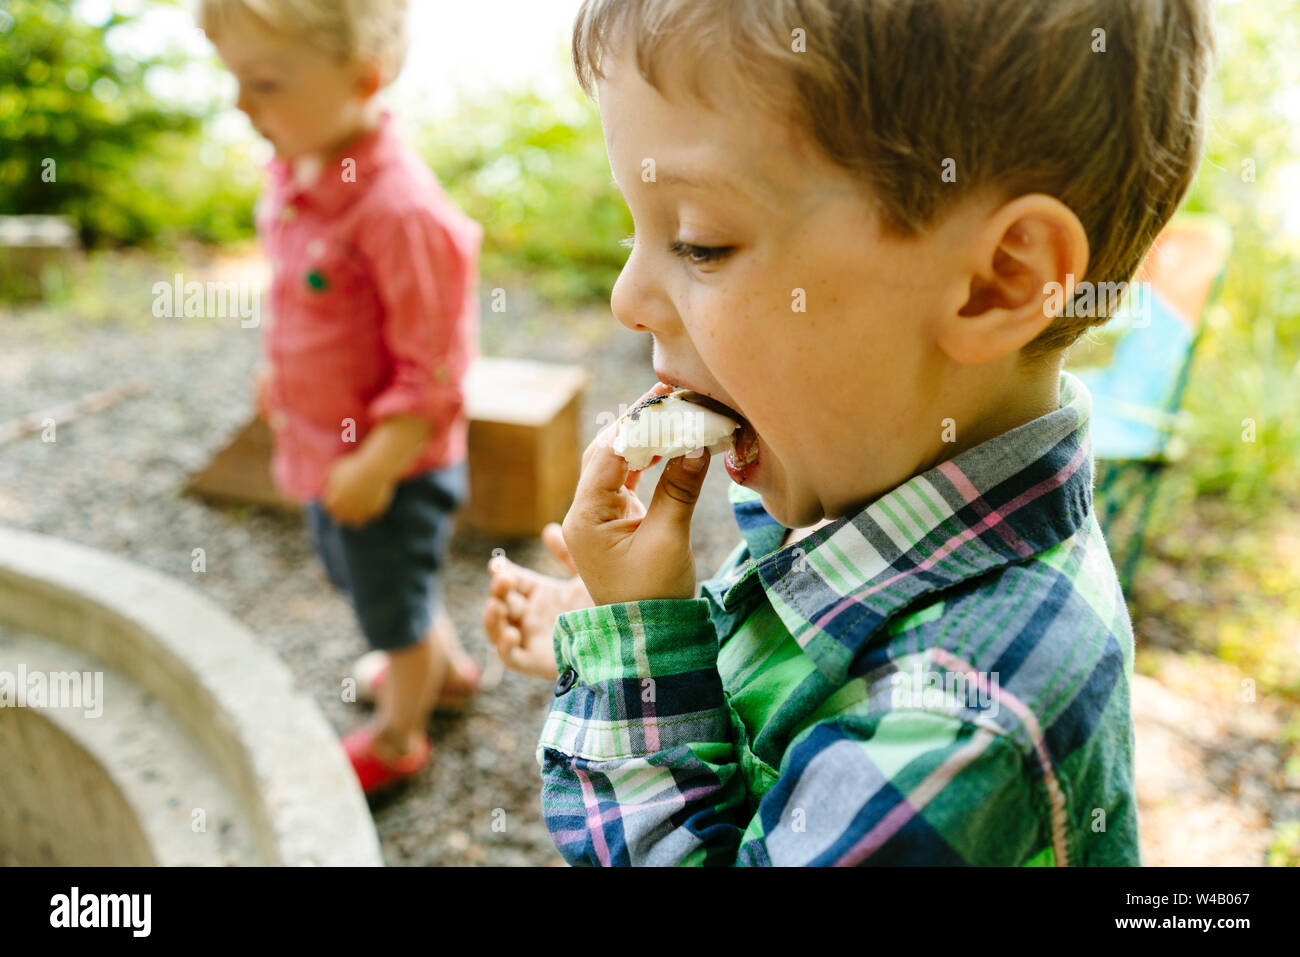 Closeup side view of a young boy eating a marshmallow smore Stock Photo